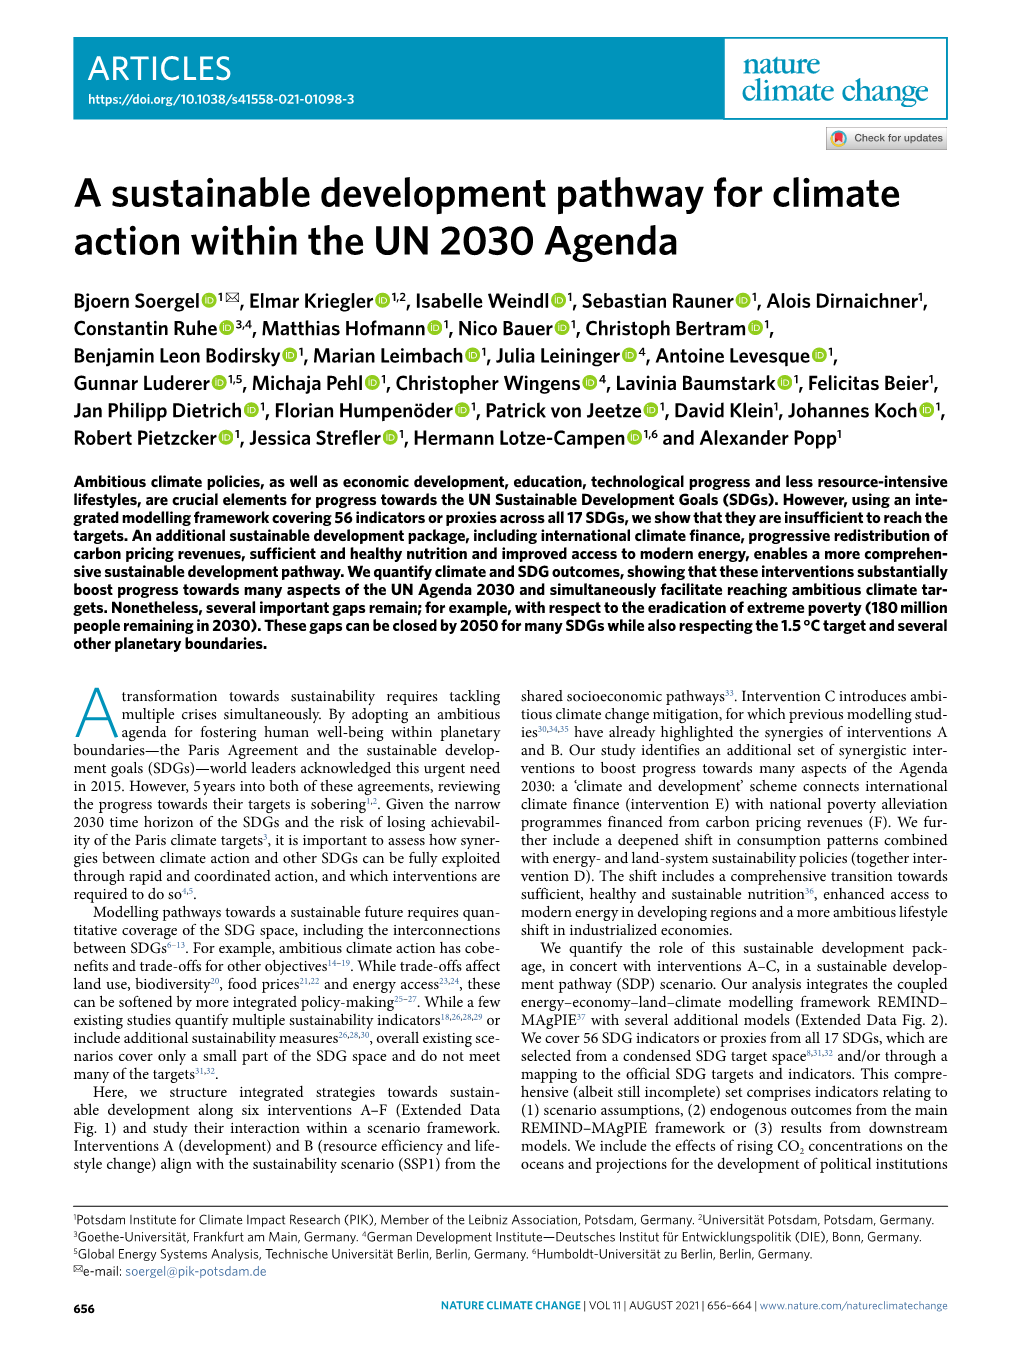 A Sustainable Development Pathway for Climate Action Within the UN 2030 Agenda